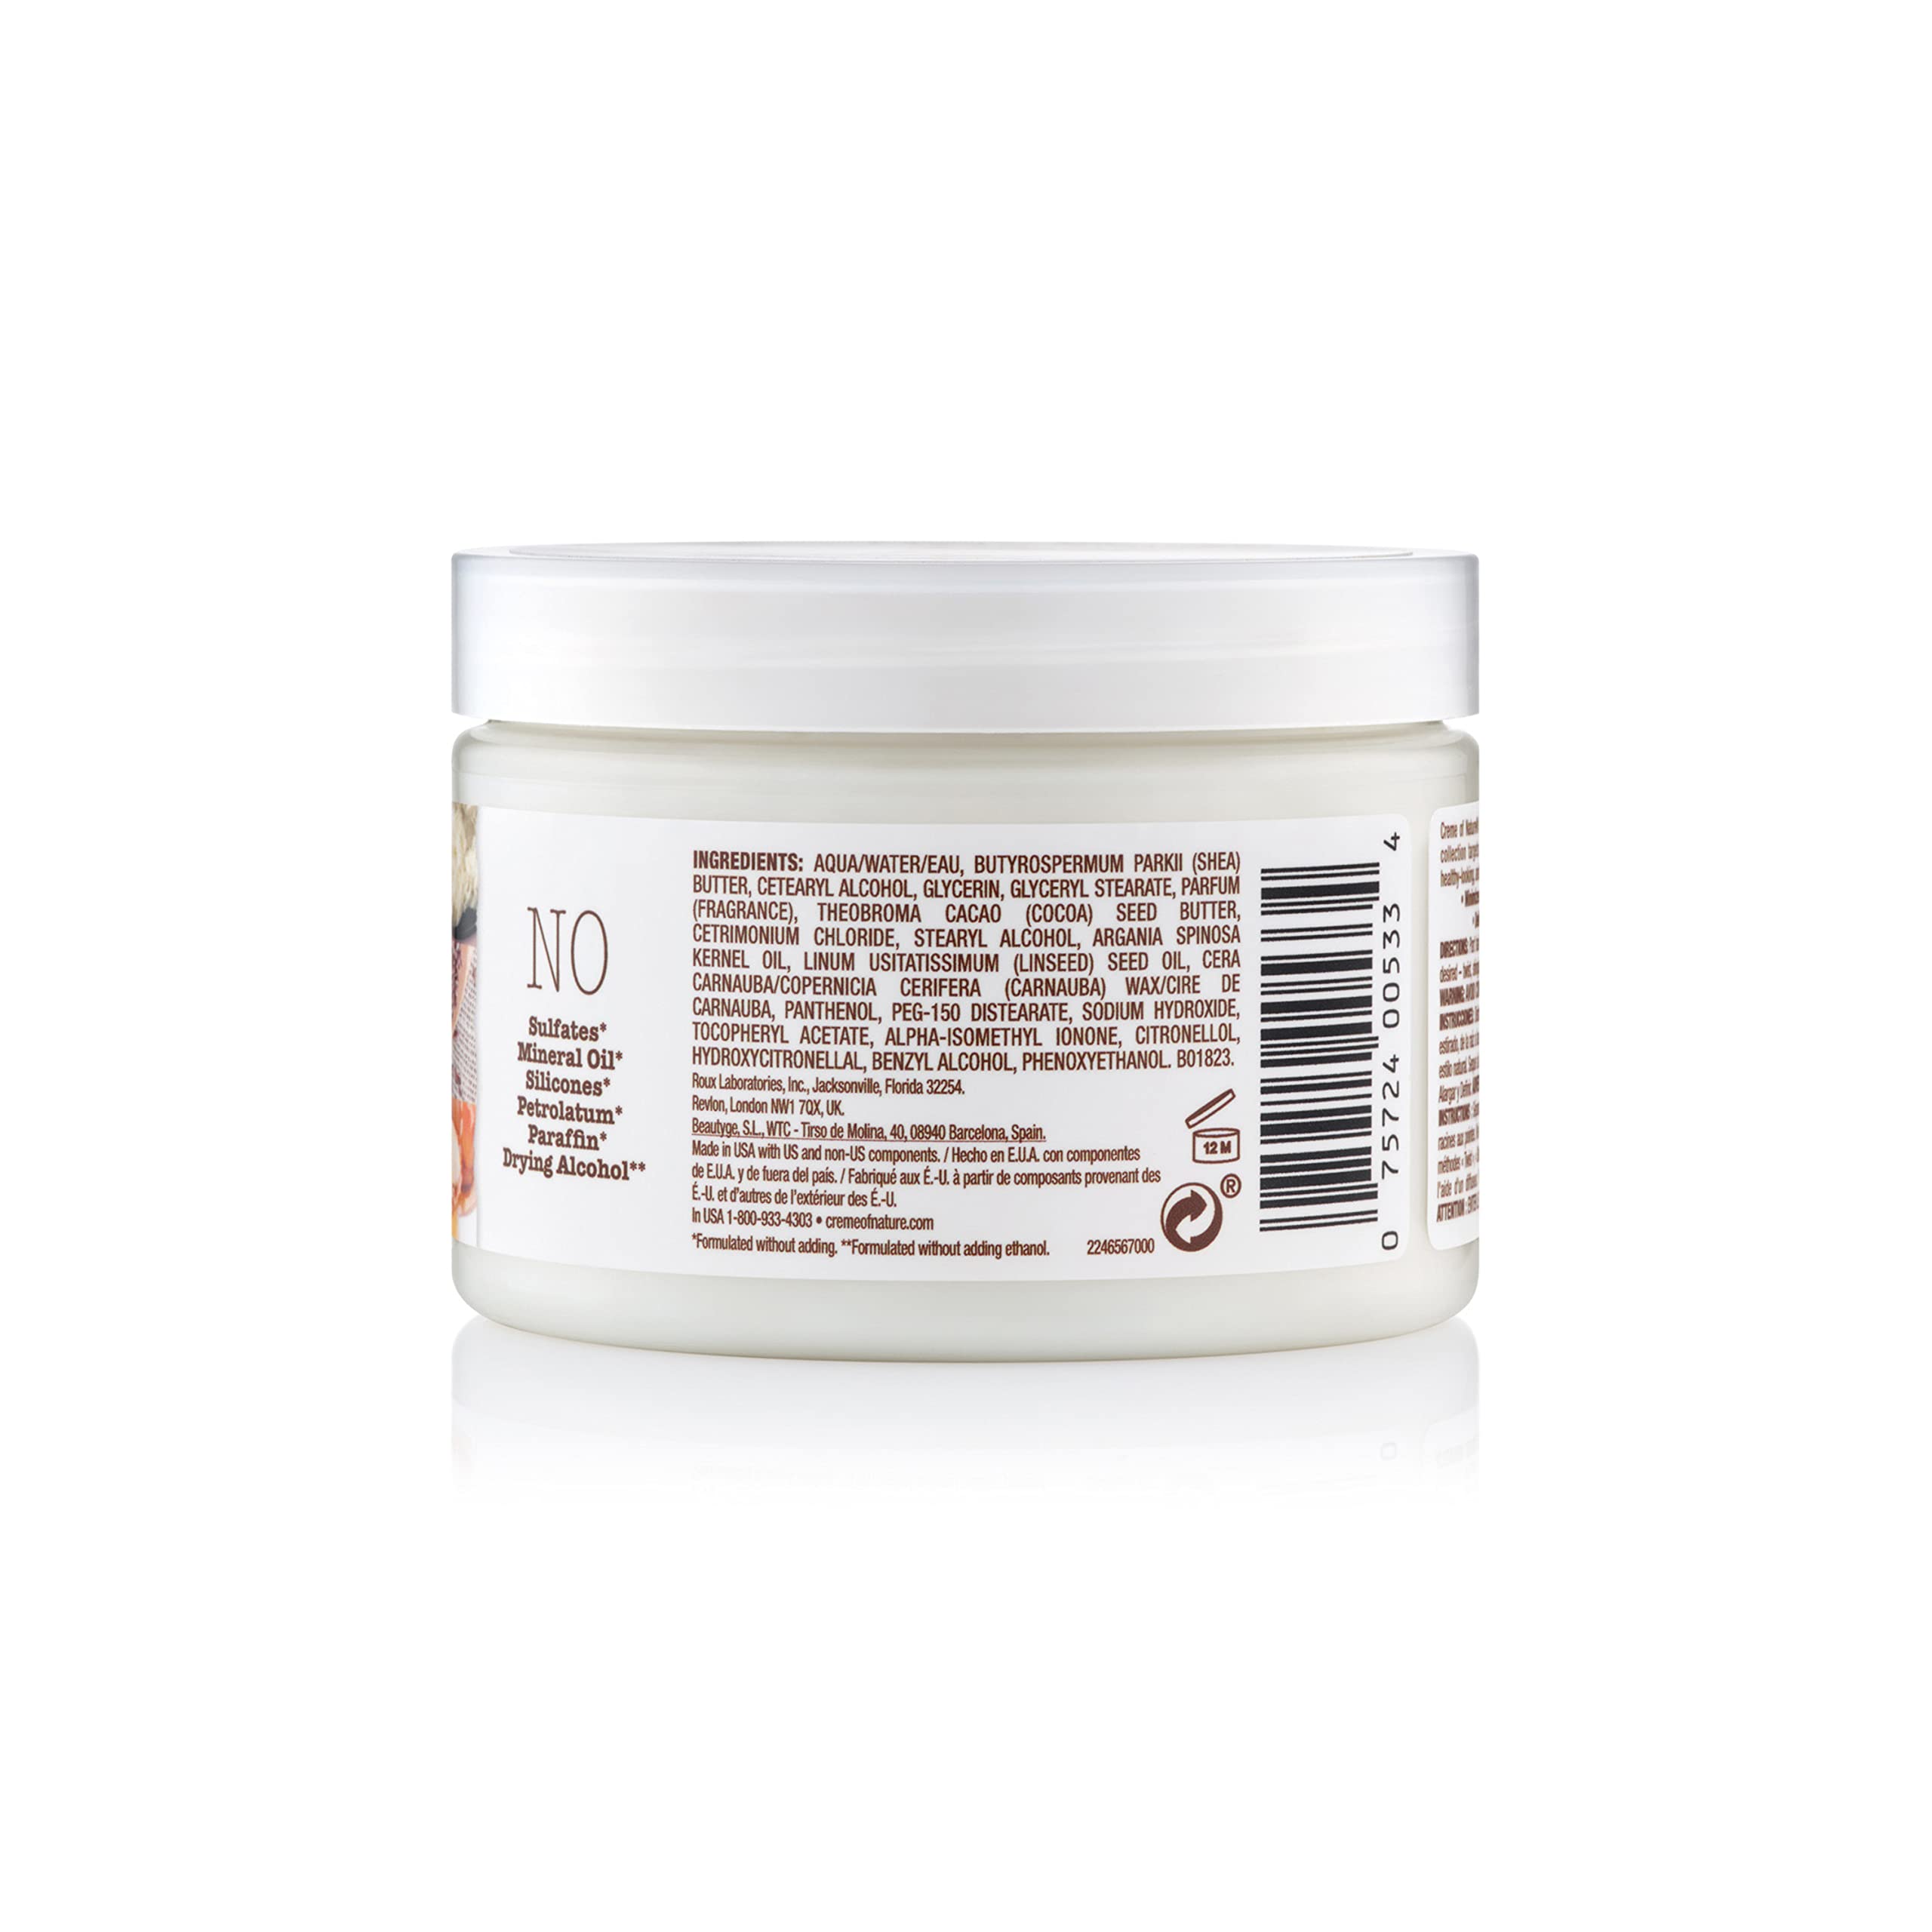 Curl Definition Pudding by Creme of Nature, Butter Blend, Argan Oil, Flaxseed Oil, Anti Frizz, 11.5 Oz